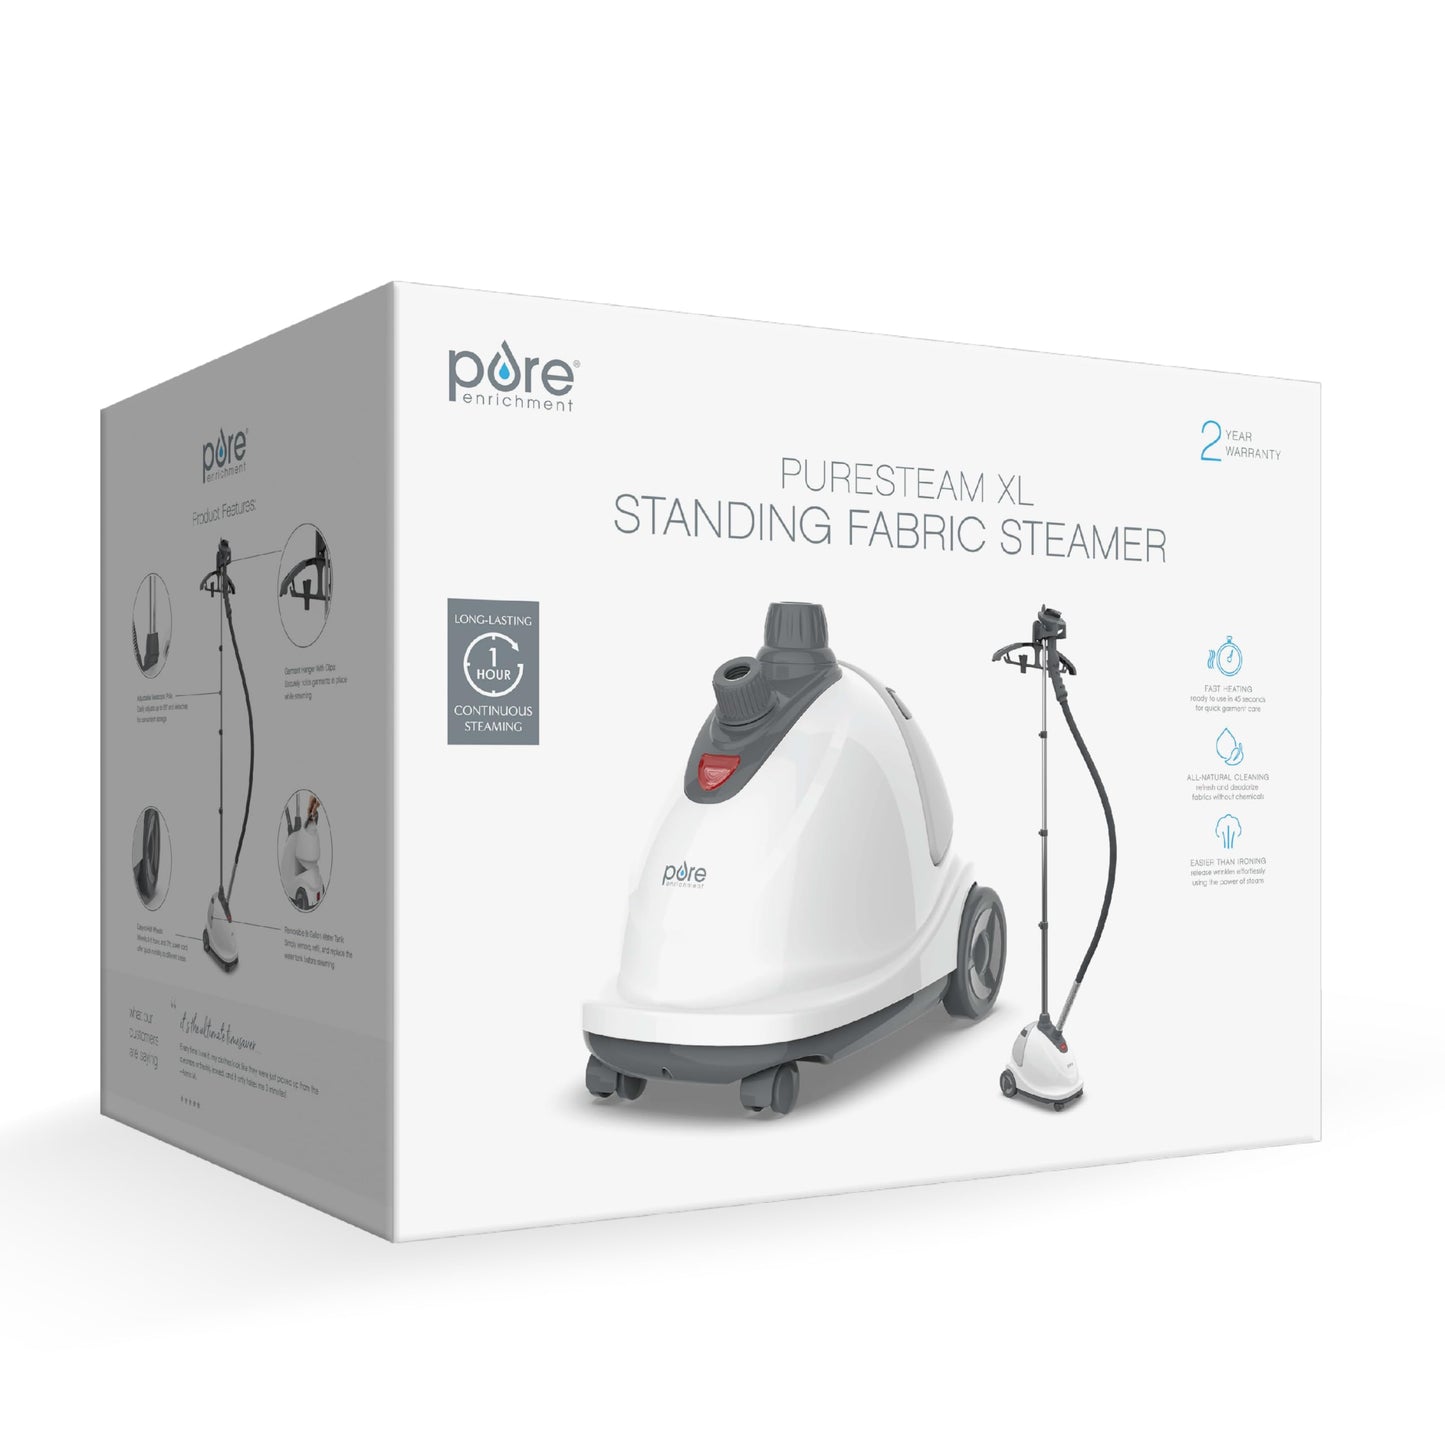 Pure Enrichment® PureSteam™ XL Standing Fabric Steamer - Professional Wrinkle Remover Heats in 45 Seconds; 1/2-Gallon Tank for 1 Hour of Steaming; Easy-Roll Wheels, Garment Hanger, & Fabric Brush